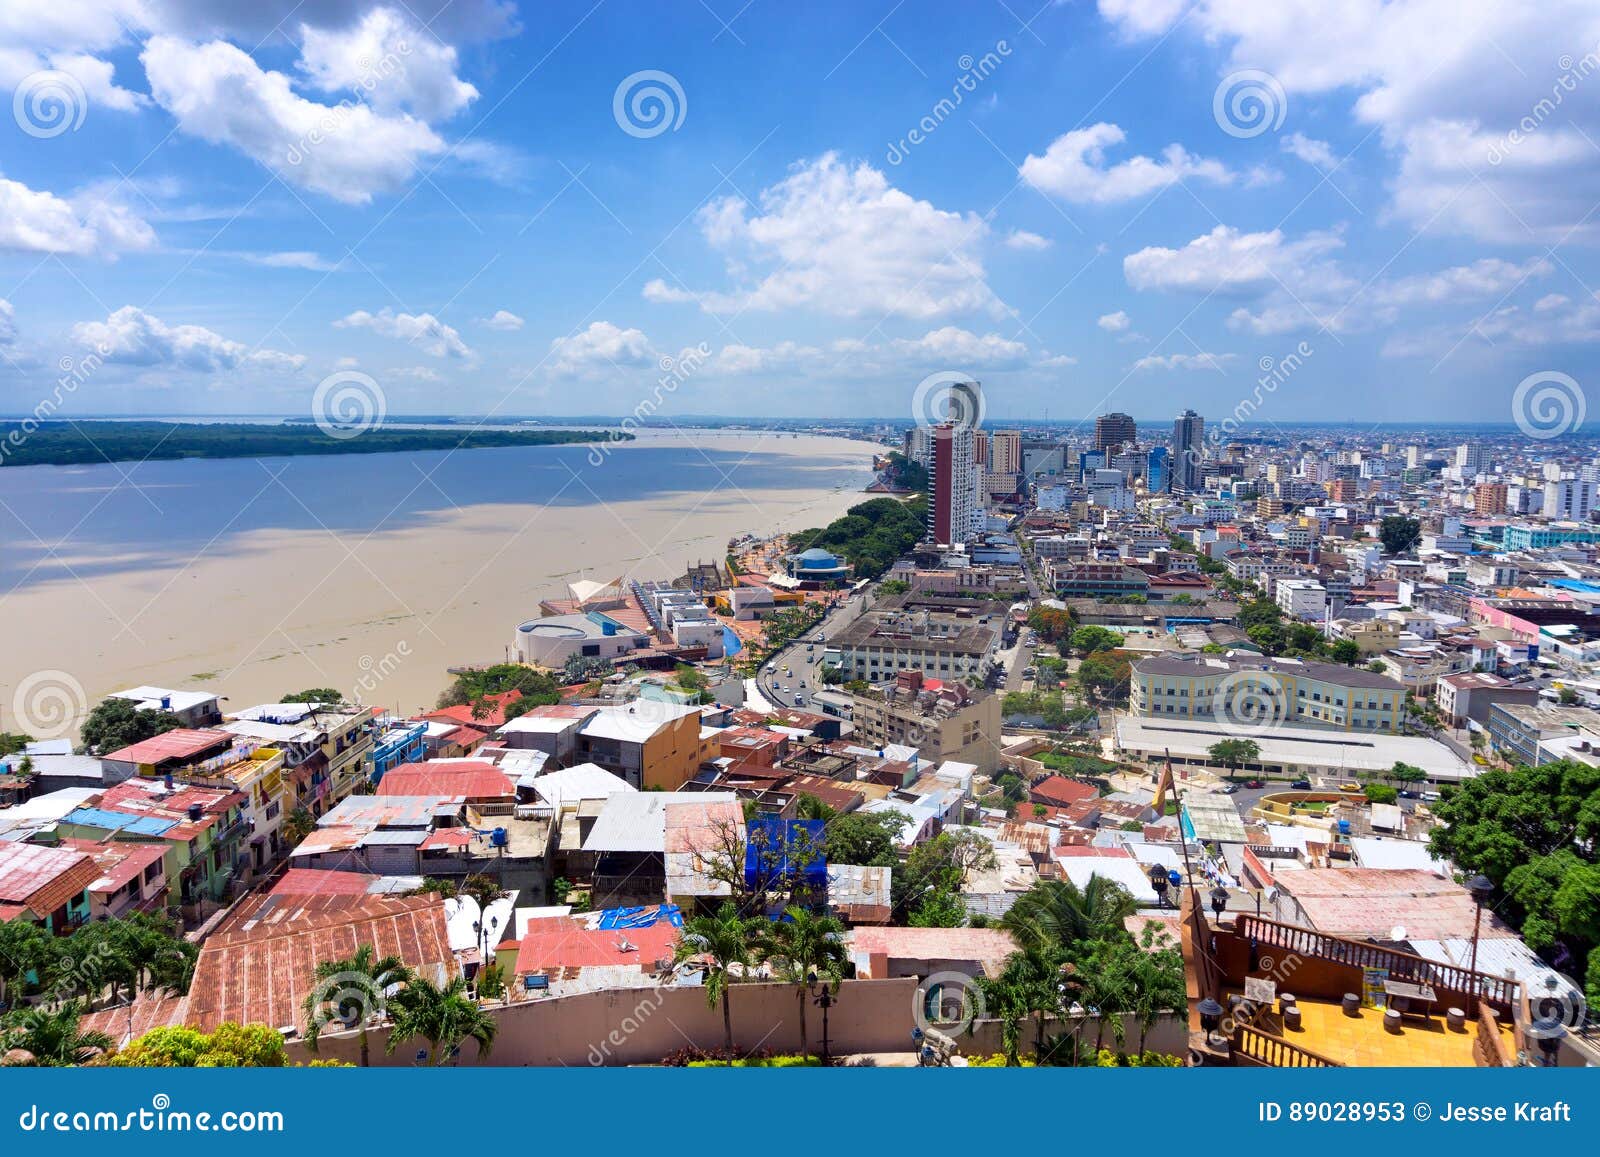 guayaquil and guayas river